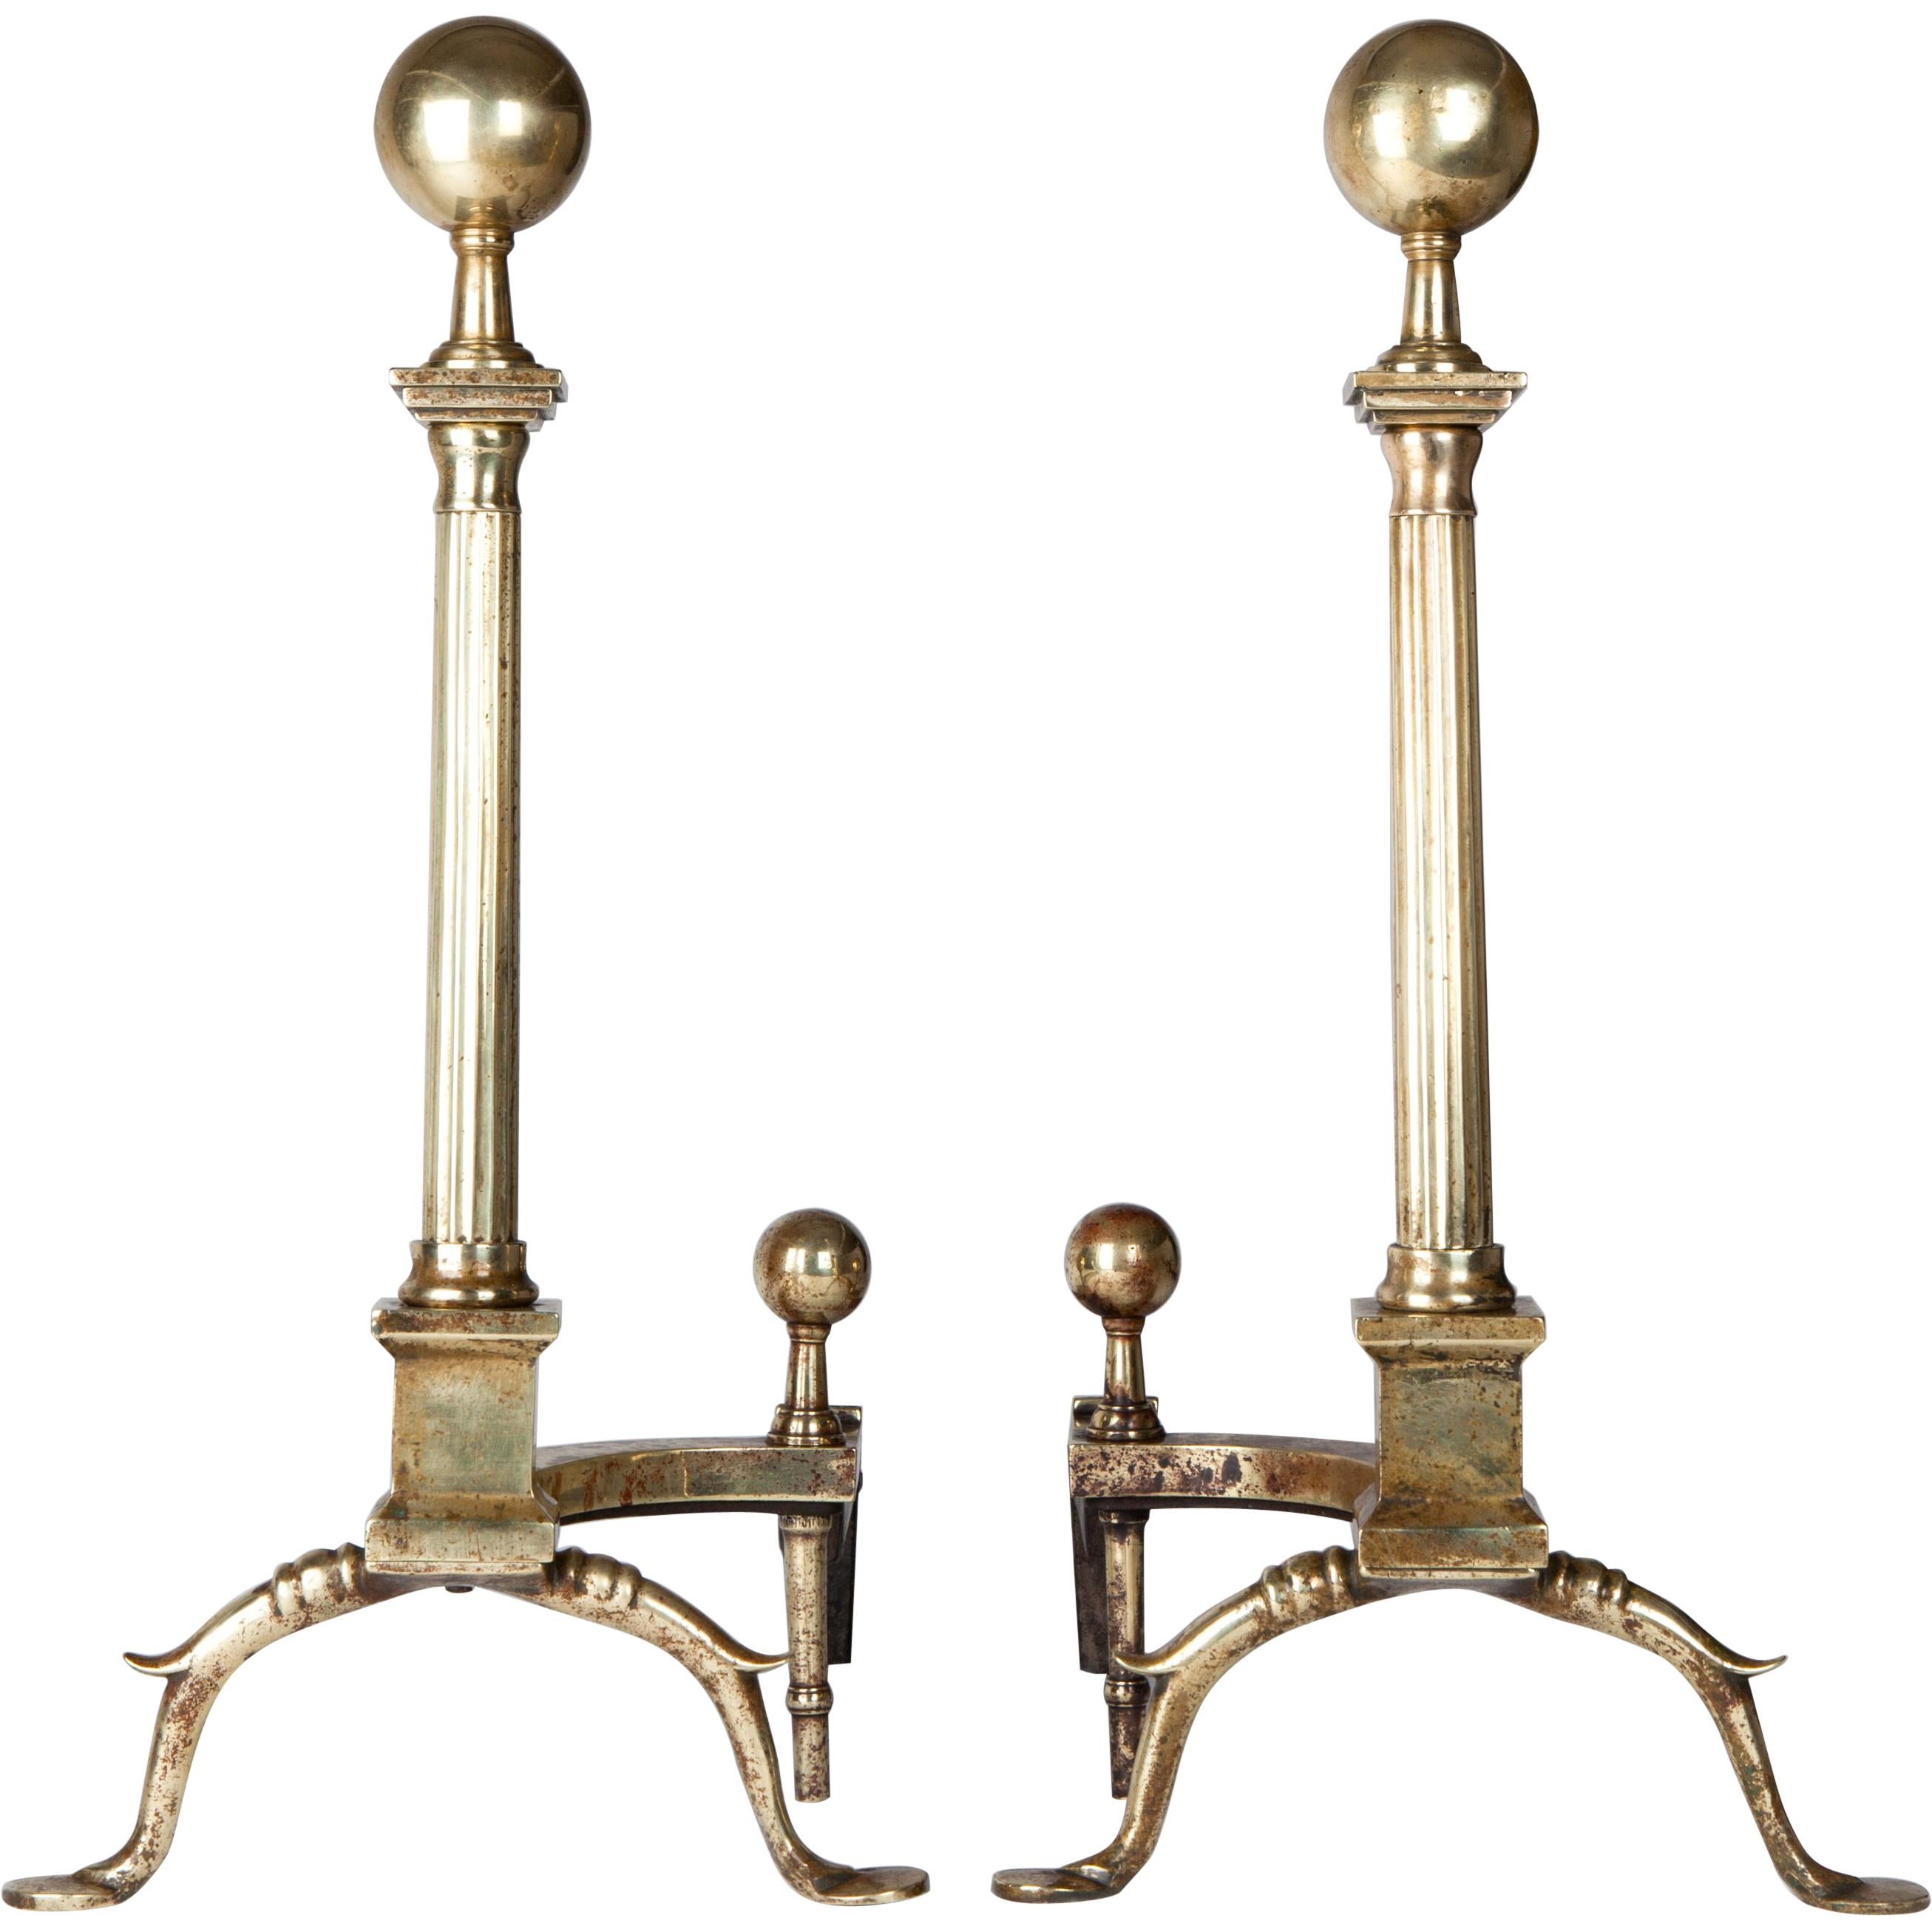 Early 20th Century Neoclassical Polished Brass Andirons With Fluted Columns